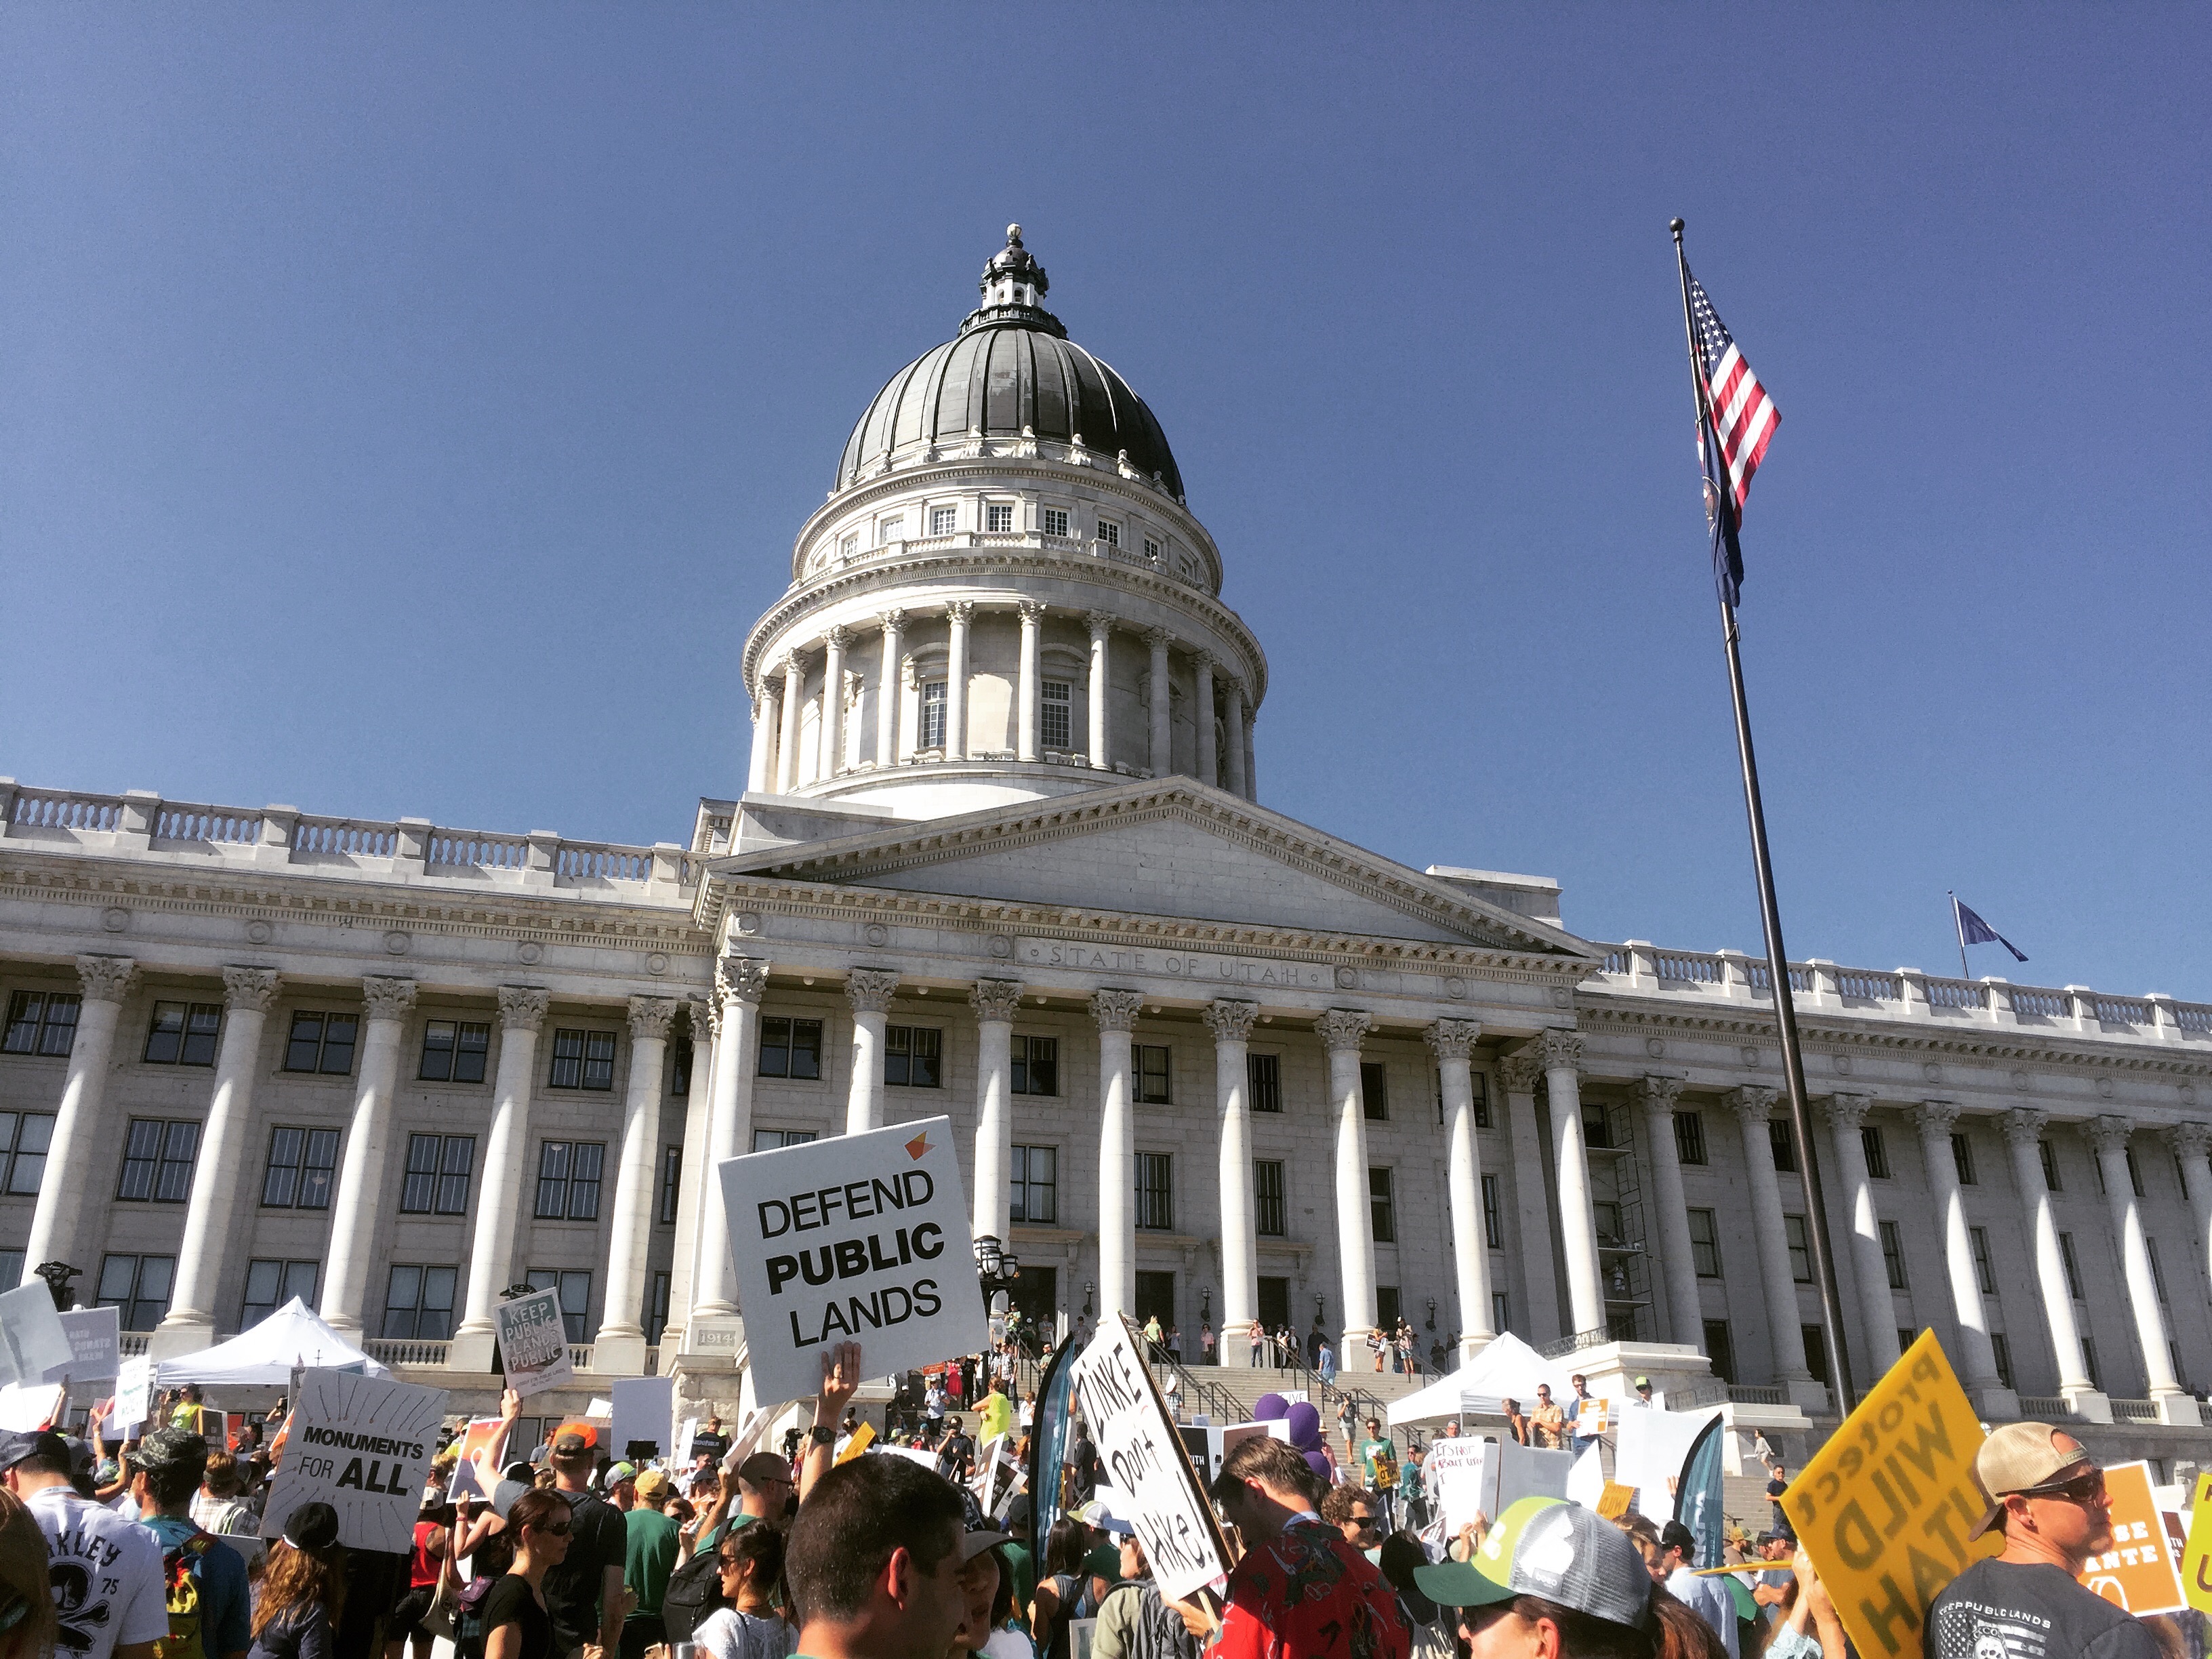 The This Land is Our Land March for Public Lands congregated in front of the Utah capitol in Salt Lake City on July 27 in conjunction with the last Outdoor Retailer Summer Market trade show to be hosted by the city. OR recently agreed to move the trade show to Denver starting next year in response to Utah lawmakers' continued efforts to rescind Bears Ears and Grand Staircase Escalante National Monuments. [Photo] Emma Murray